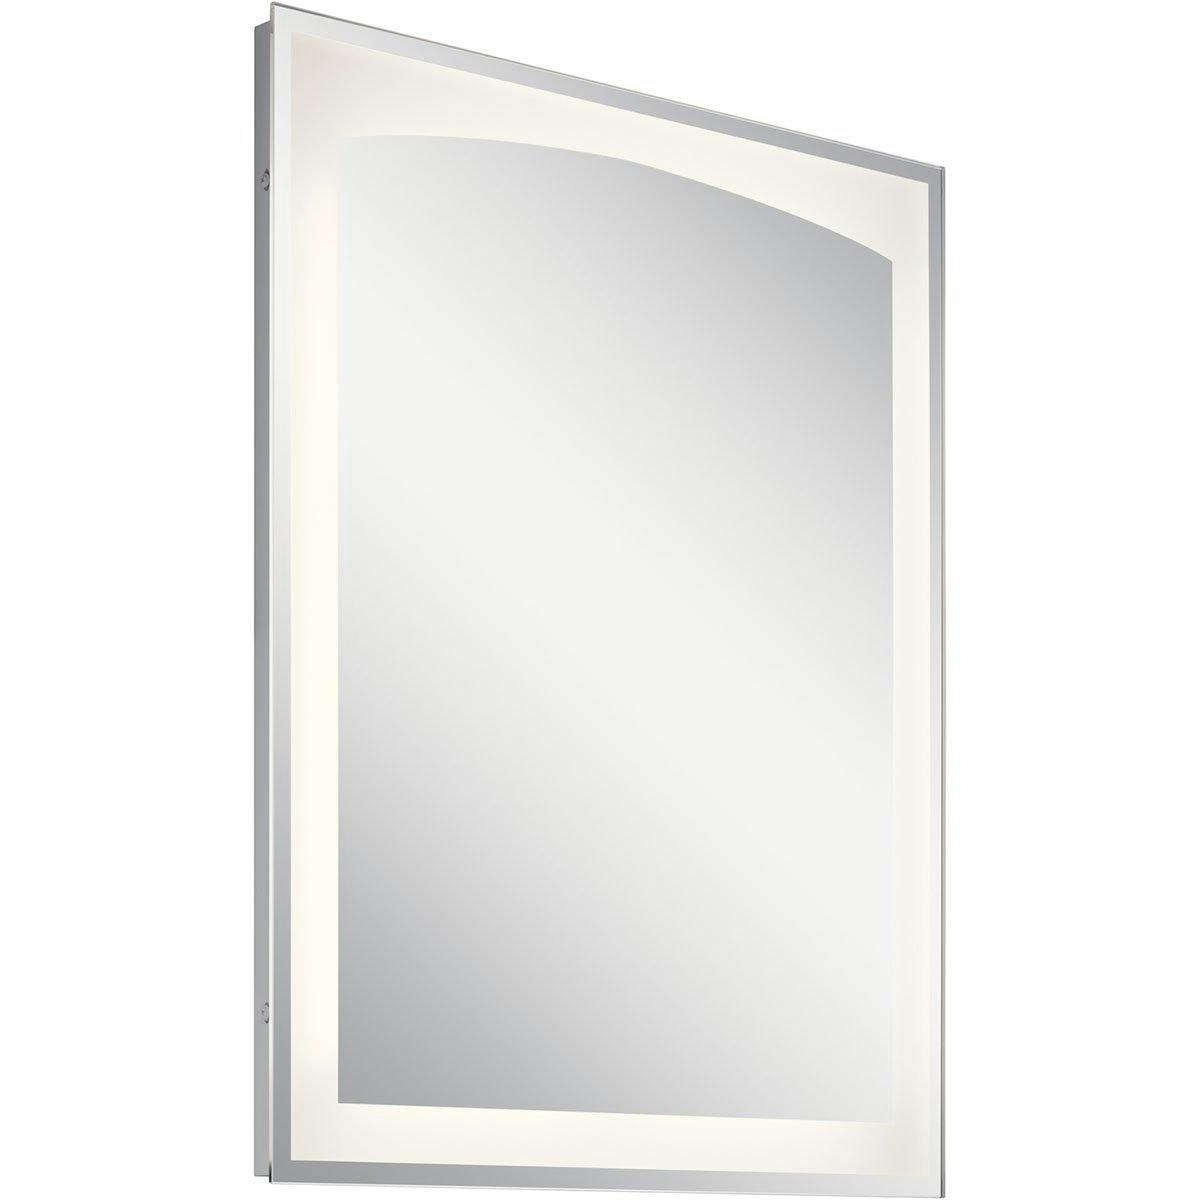 Tyan 30" LED Vanity Mirror White on a white background